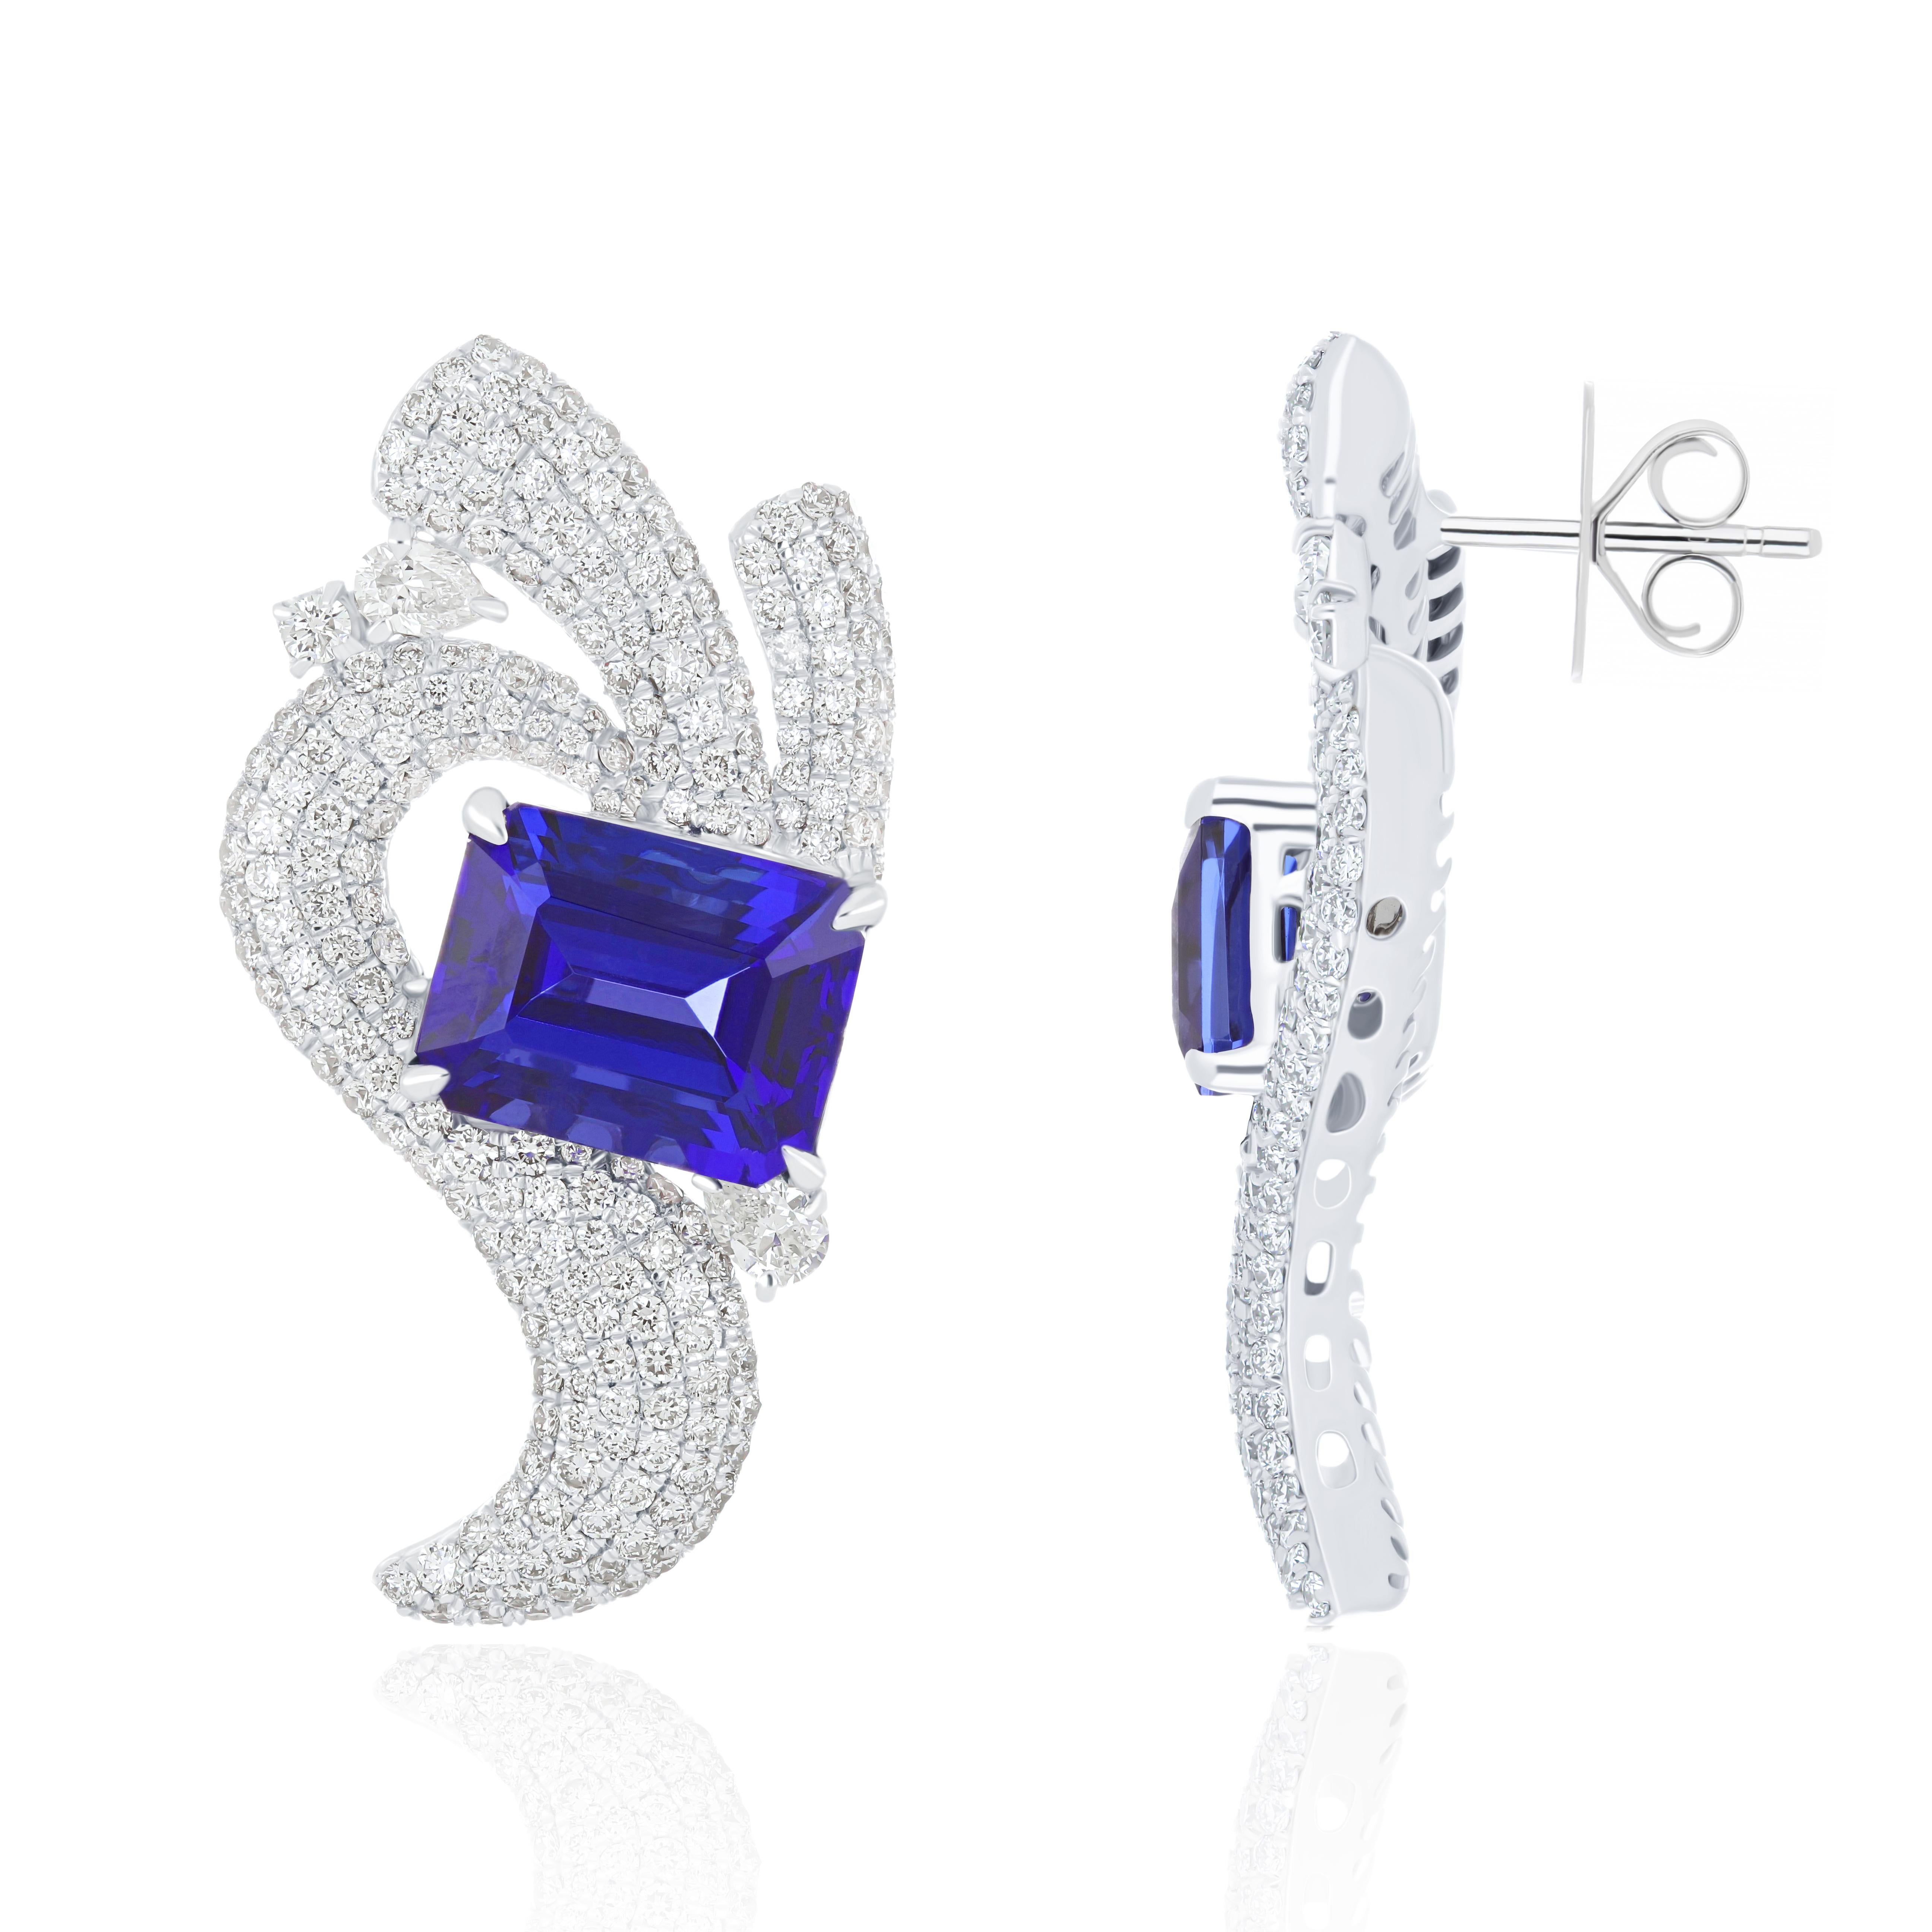 Elegant and Exquisitely detailed White Gold Earring, with 10.30 cts. (approx.) Tanzanite Octagon Shape Faceted cut accented with micro pave Diamonds, weighing approx. 3.40 cts. (approx.). total carat weight. Beautifully Hand-Crafted Earring in 18